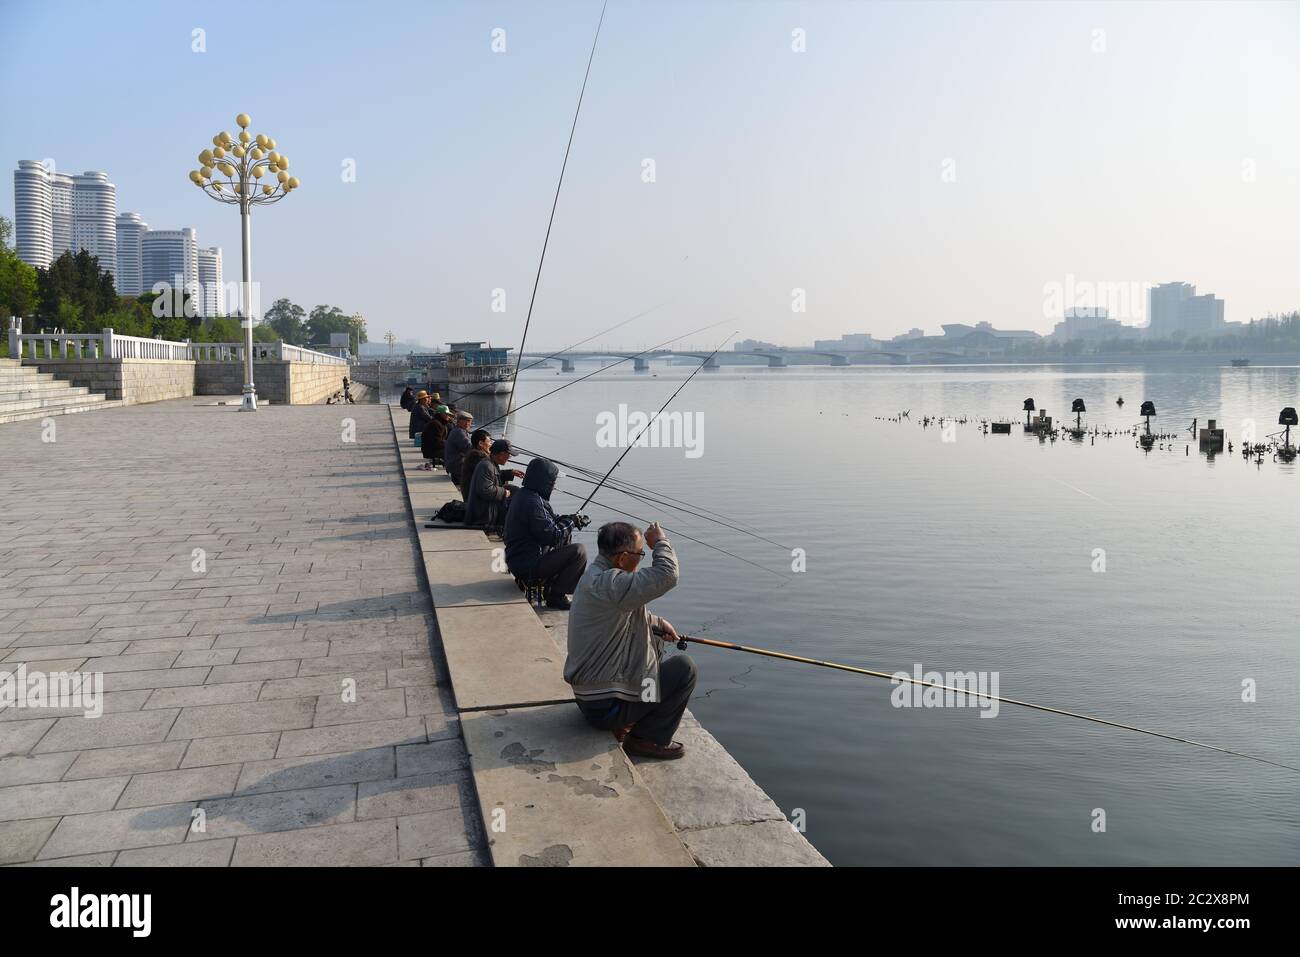 Pyongyang, North Korea - May 1, 2019: Locals fishermen catch a fish on waterfront on Kim Il Sung square at the morning Stock Photo